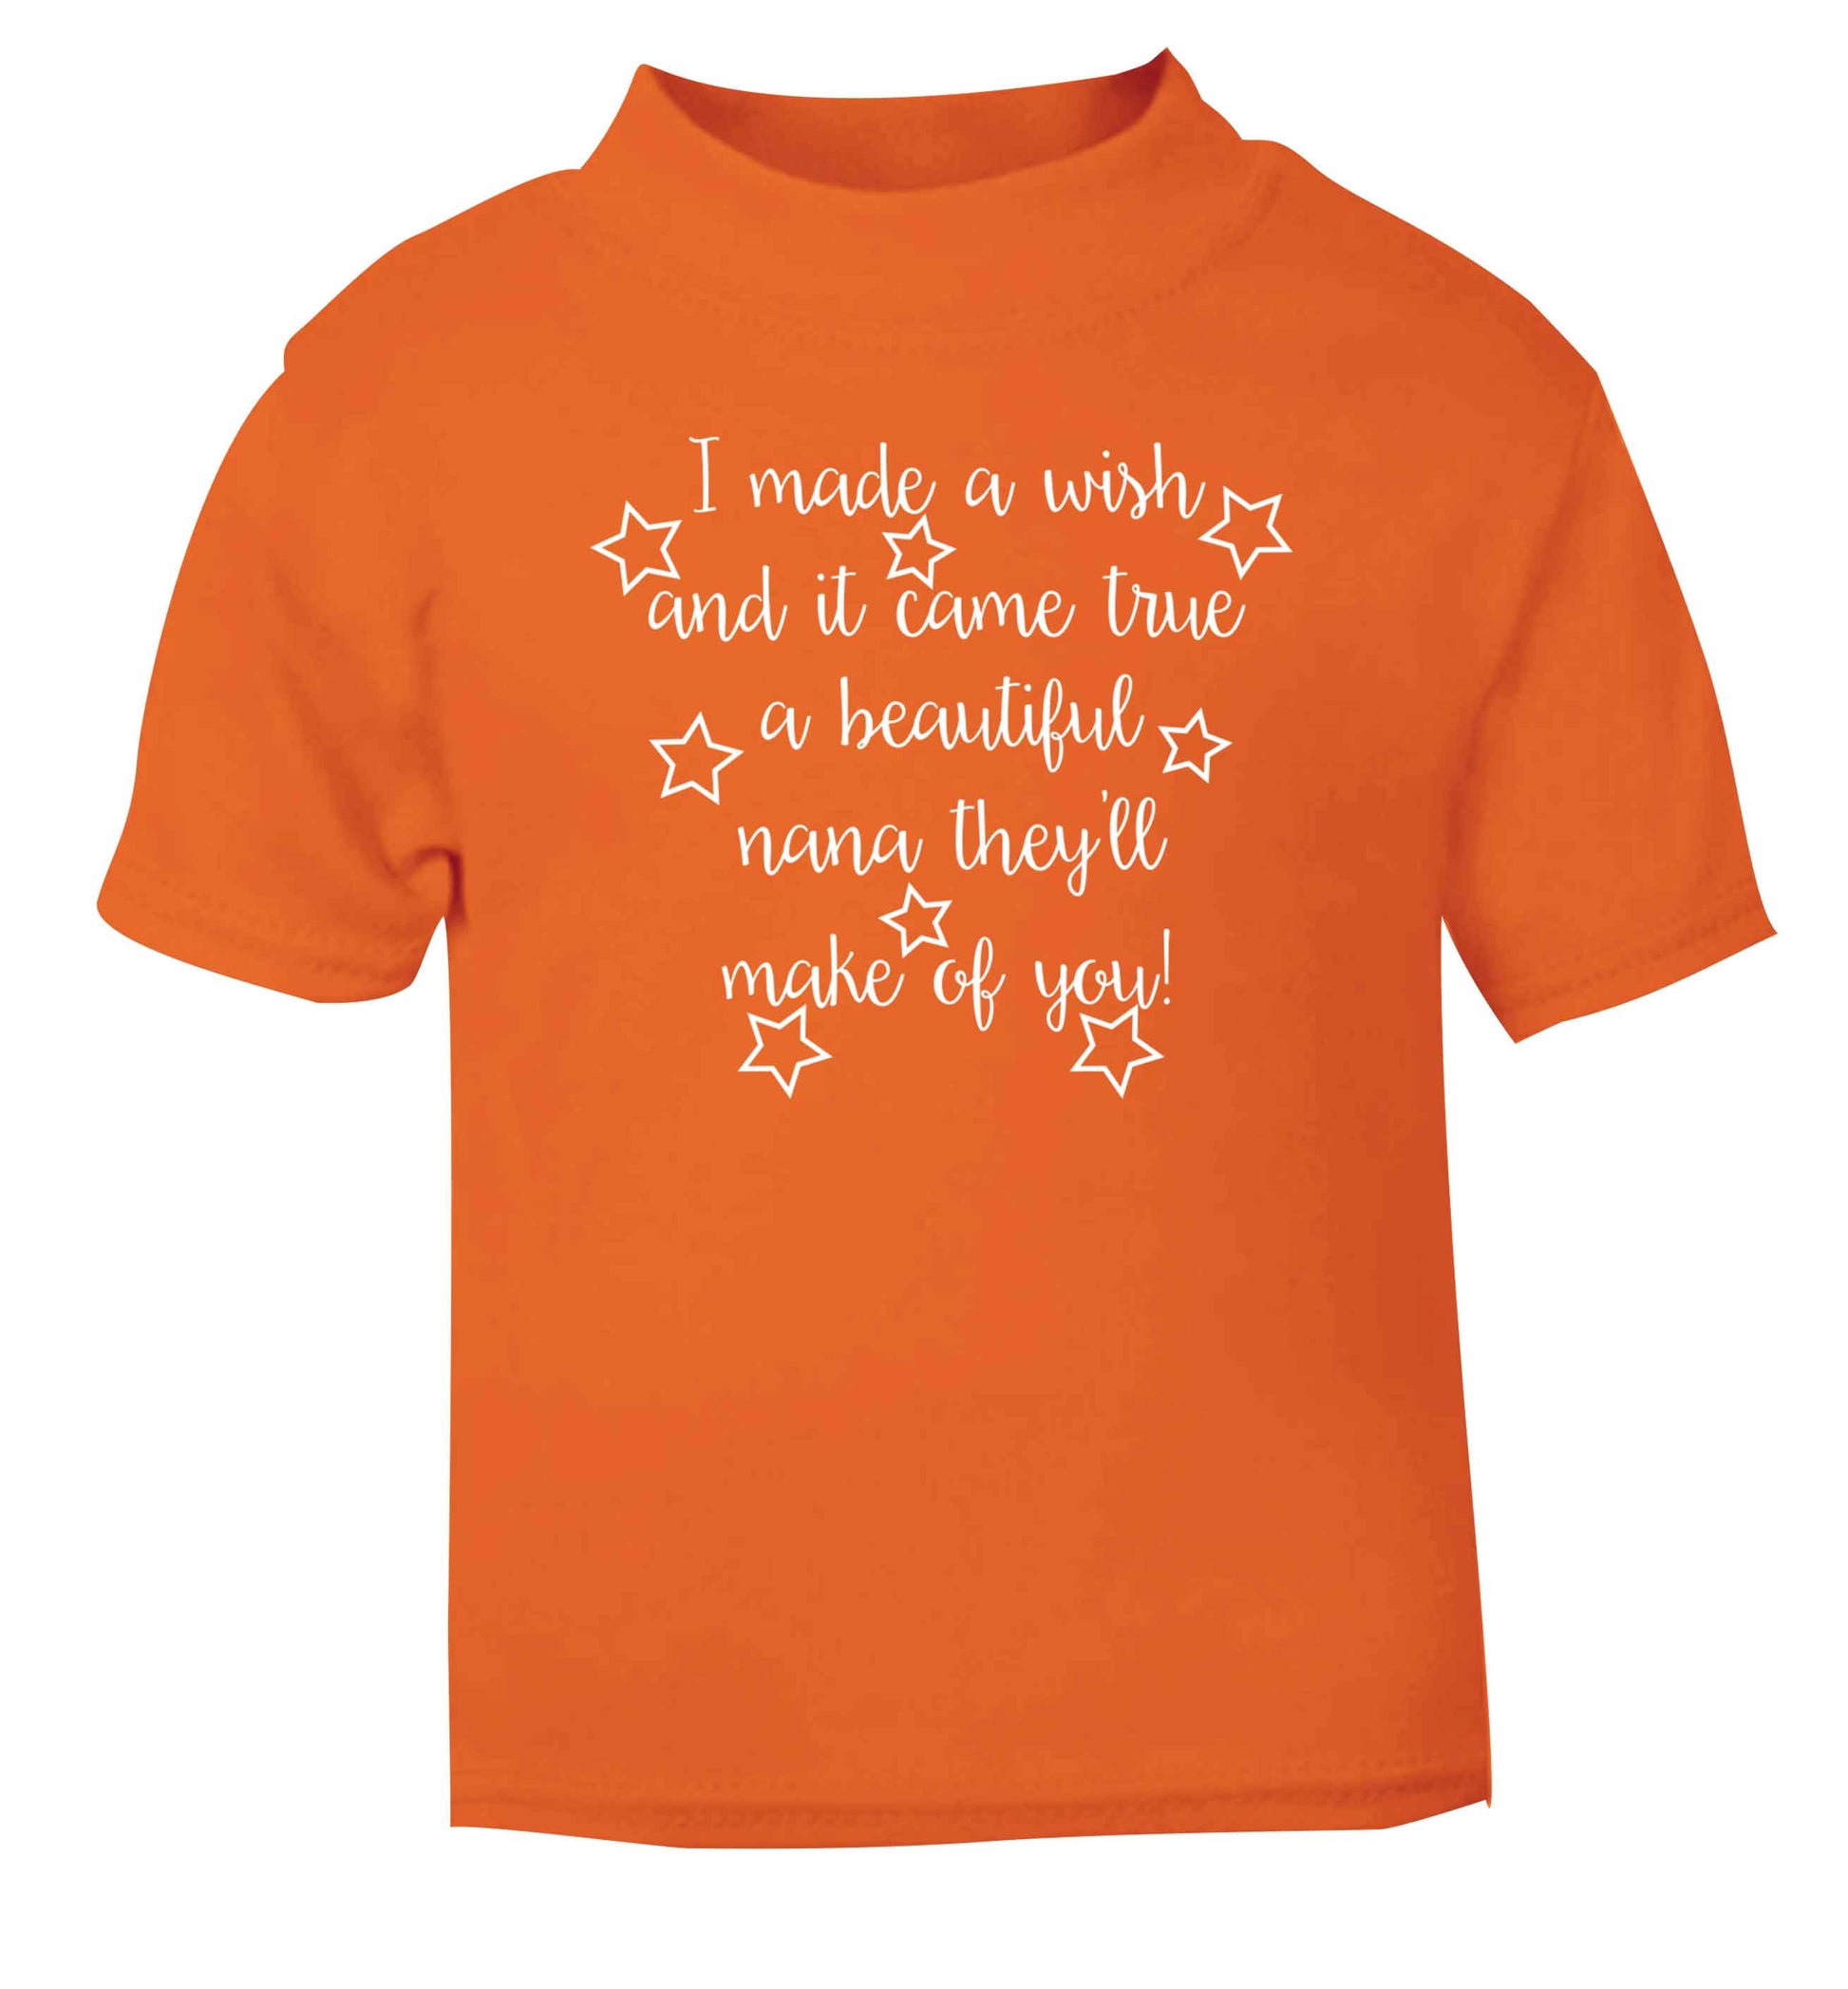 I made a wish and it came true a beautiful nana they'll make of you! orange Baby Toddler Tshirt 2 Years